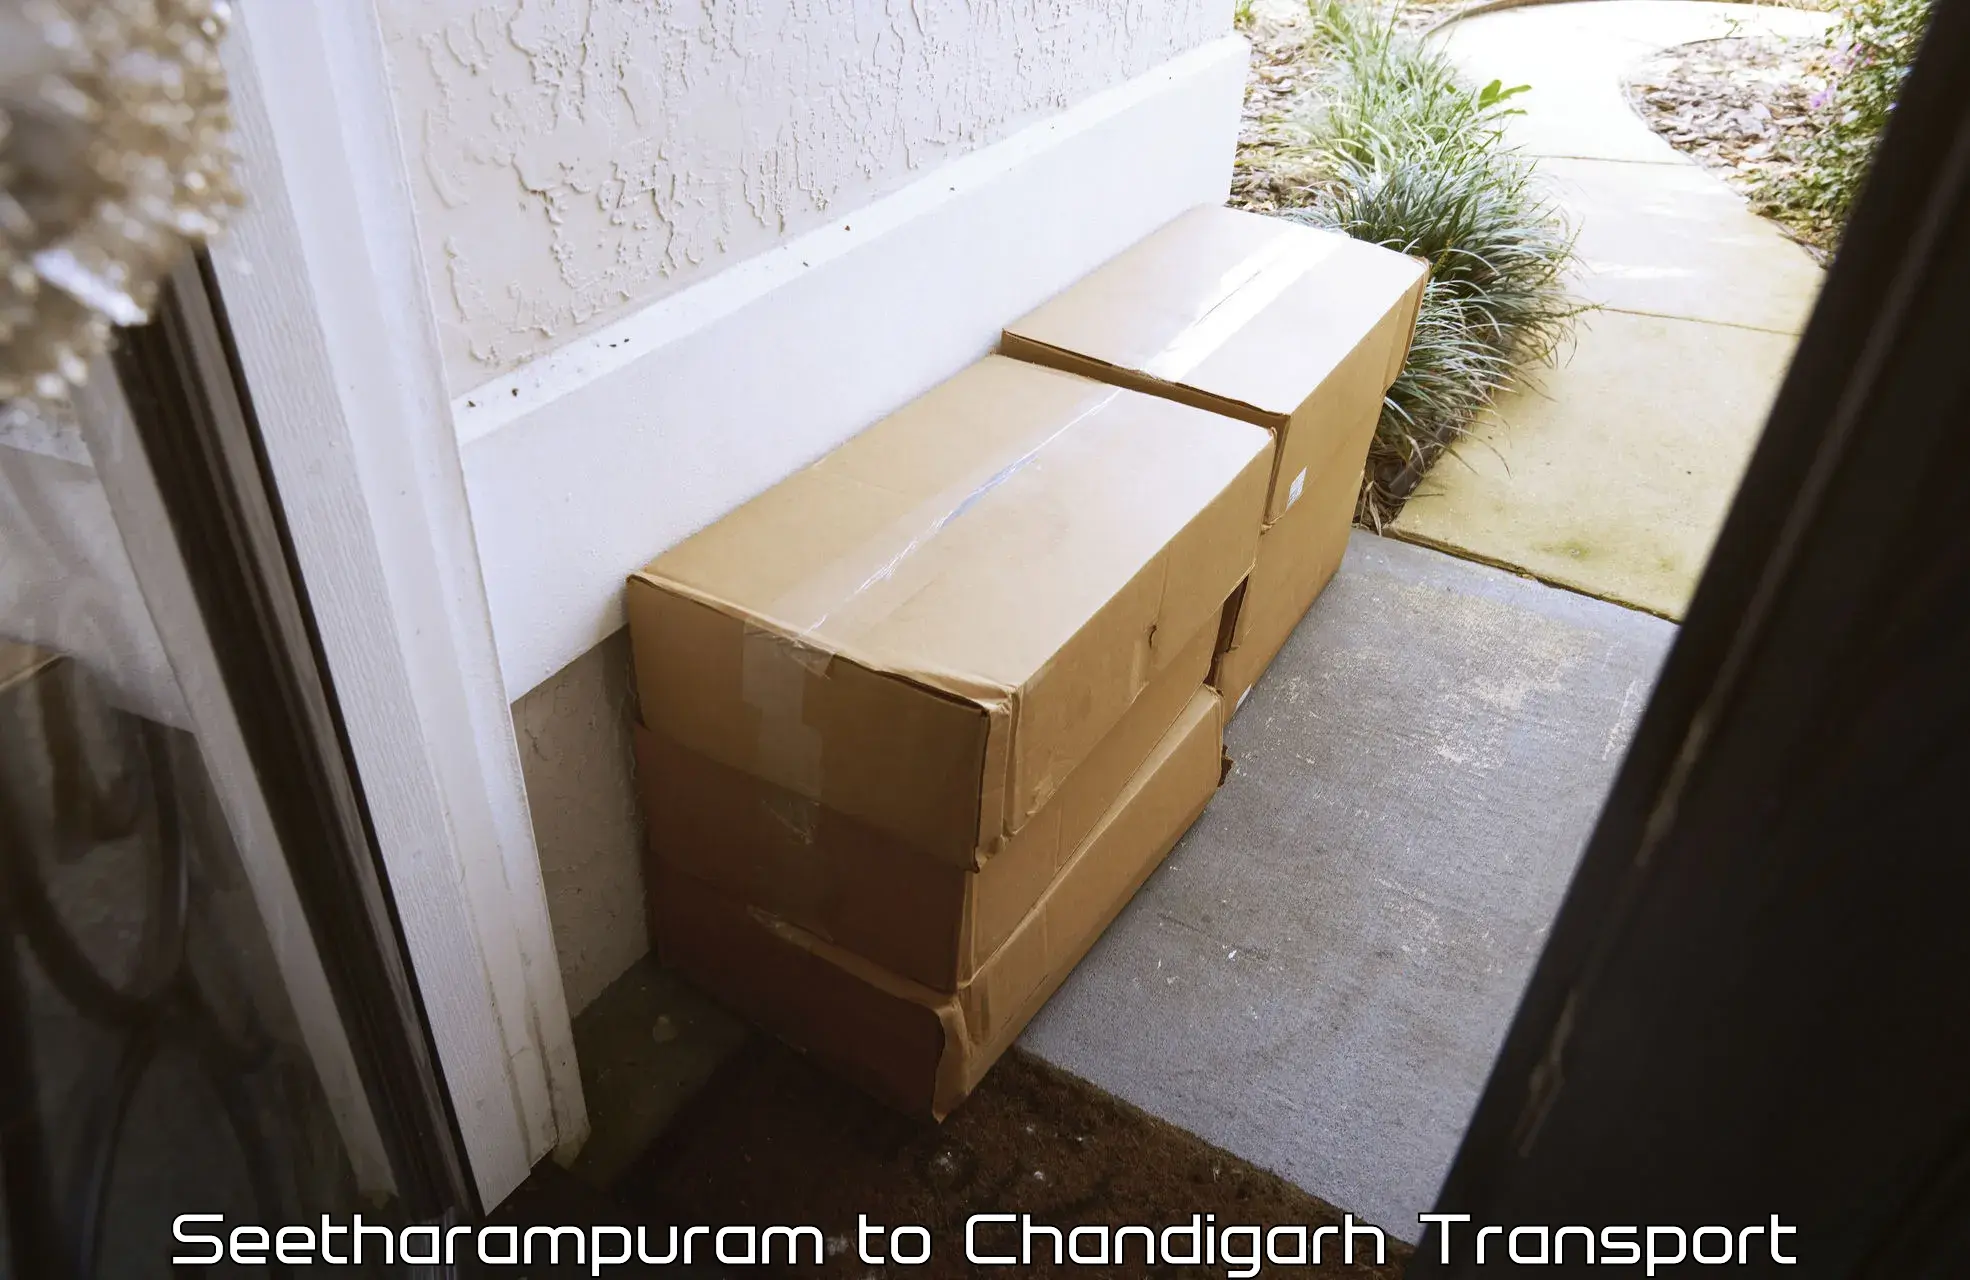 Goods delivery service Seetharampuram to Chandigarh